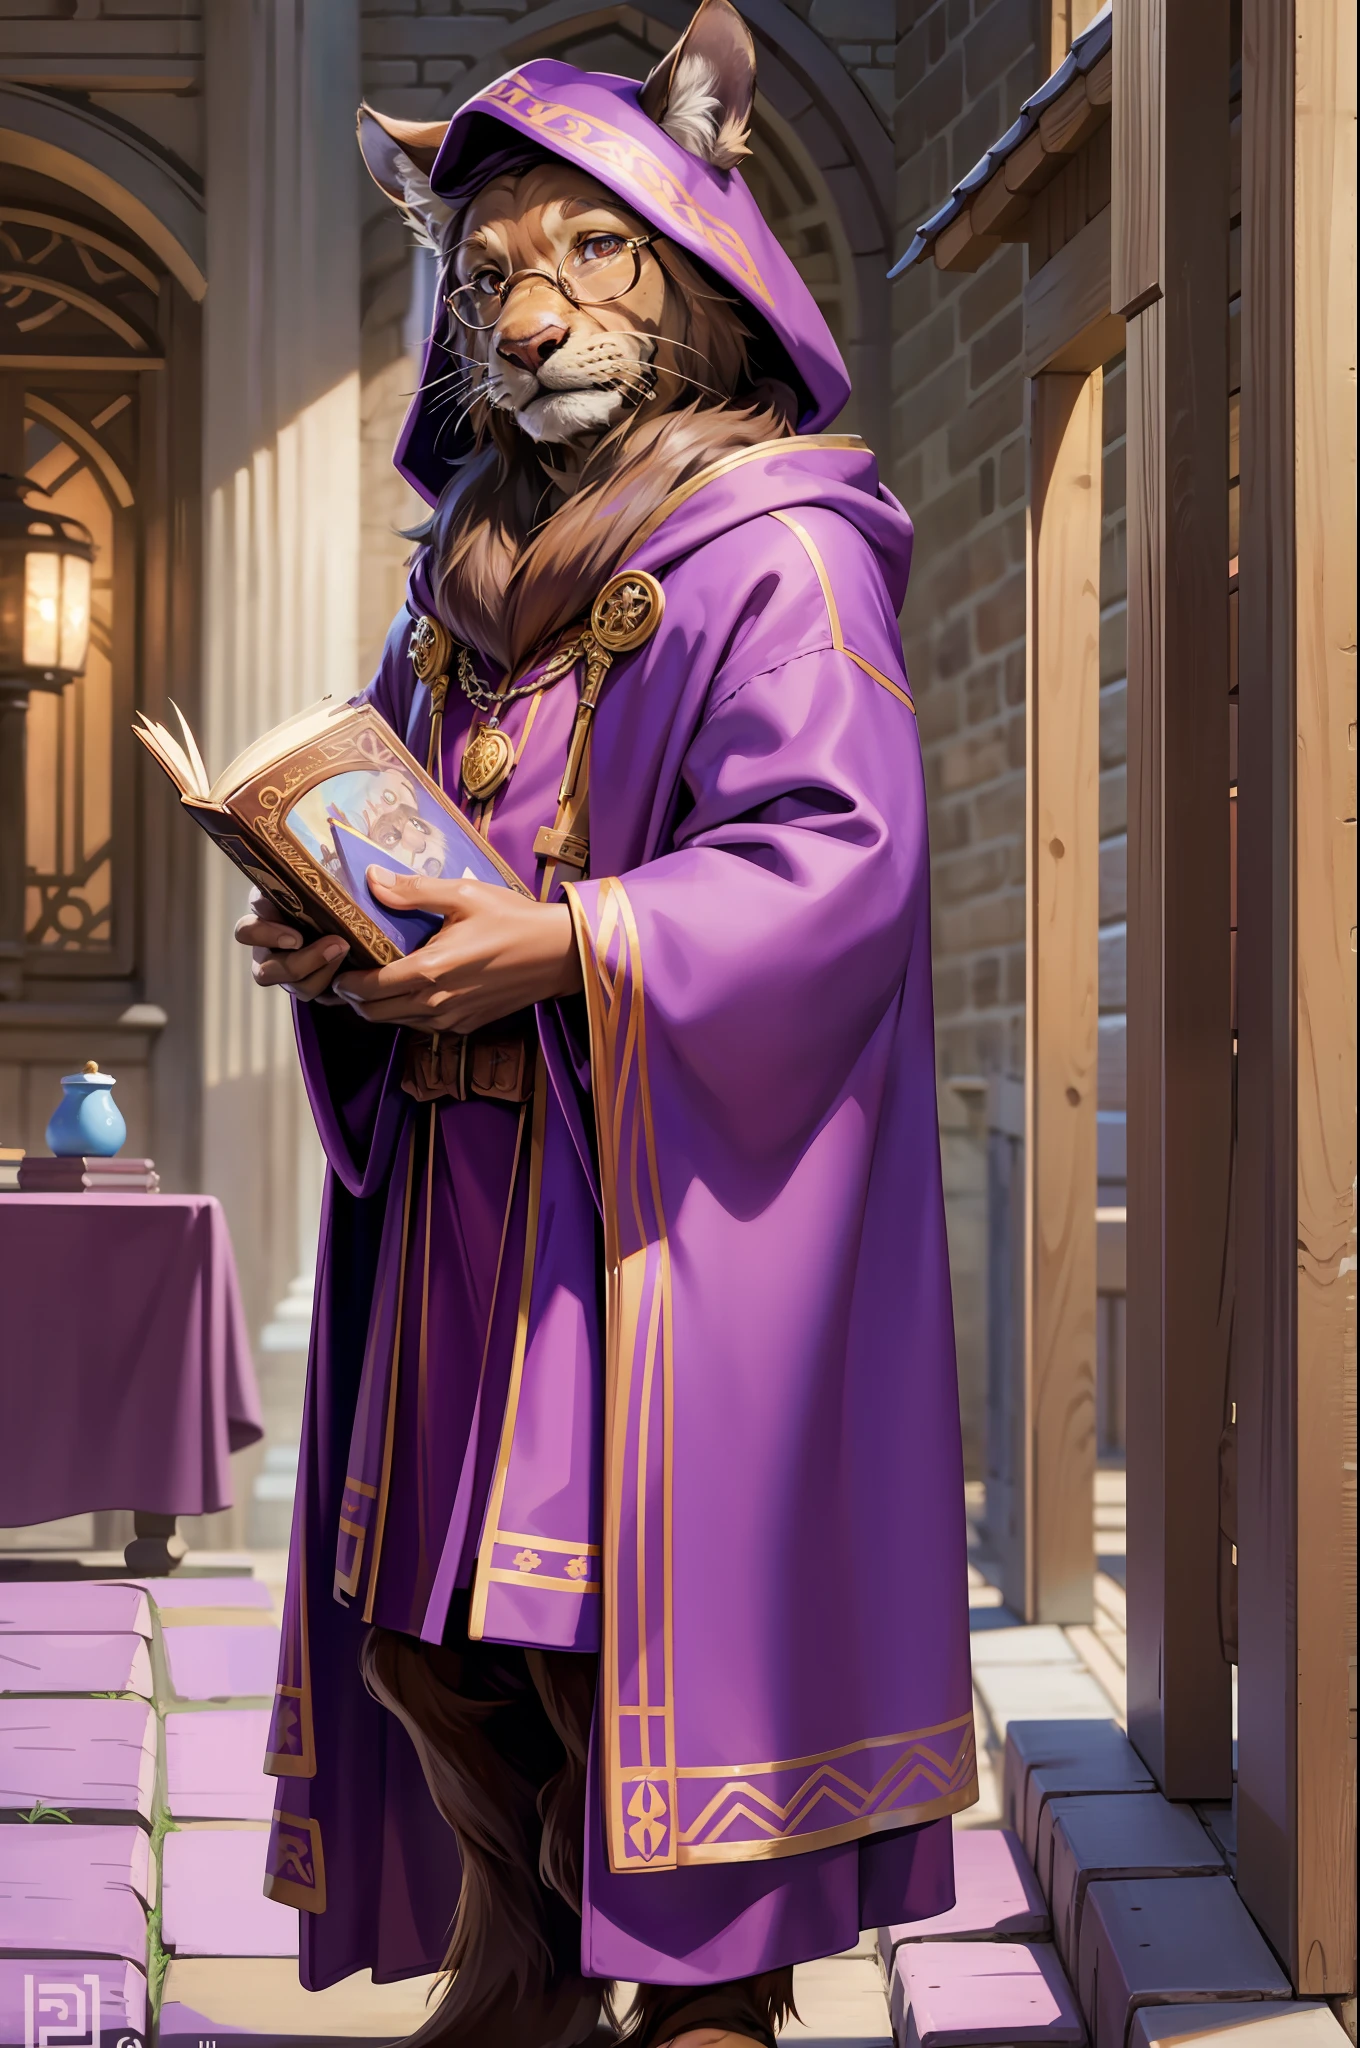 old, male, brown fur, smiling, holding a book, purple eyes, round glasses, purple robes, purple hood, masterpiece